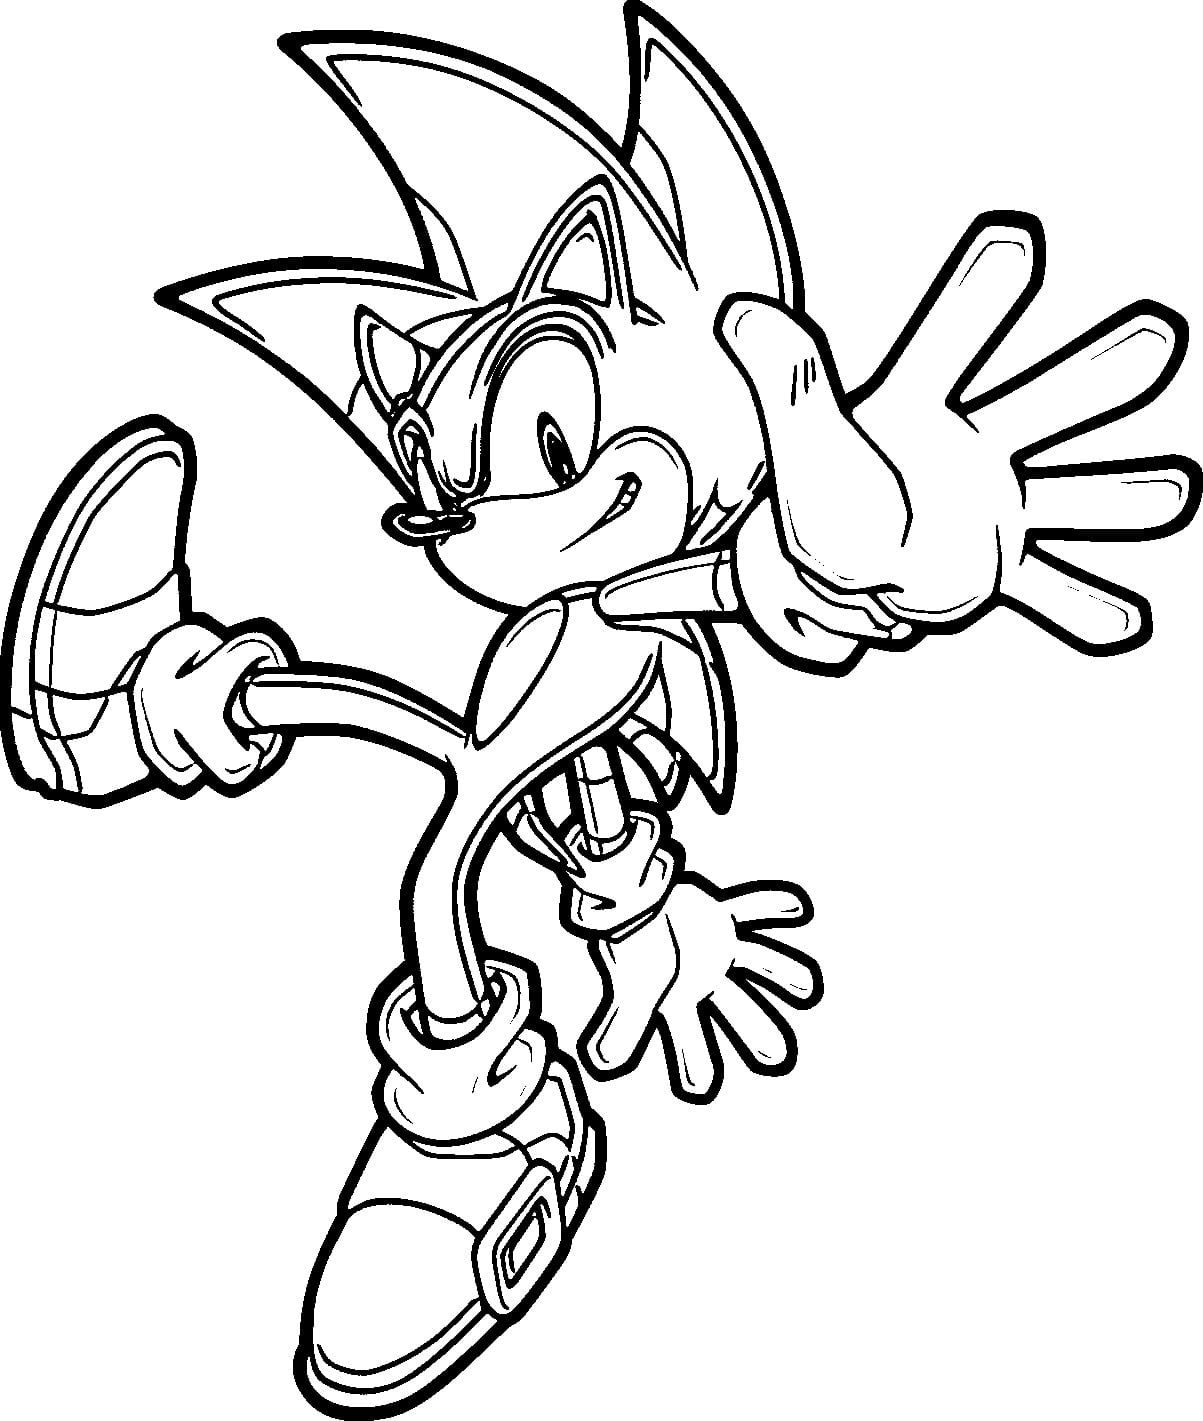 Sonic in motion - Sonic the Hedgehog Kids Coloring Pages